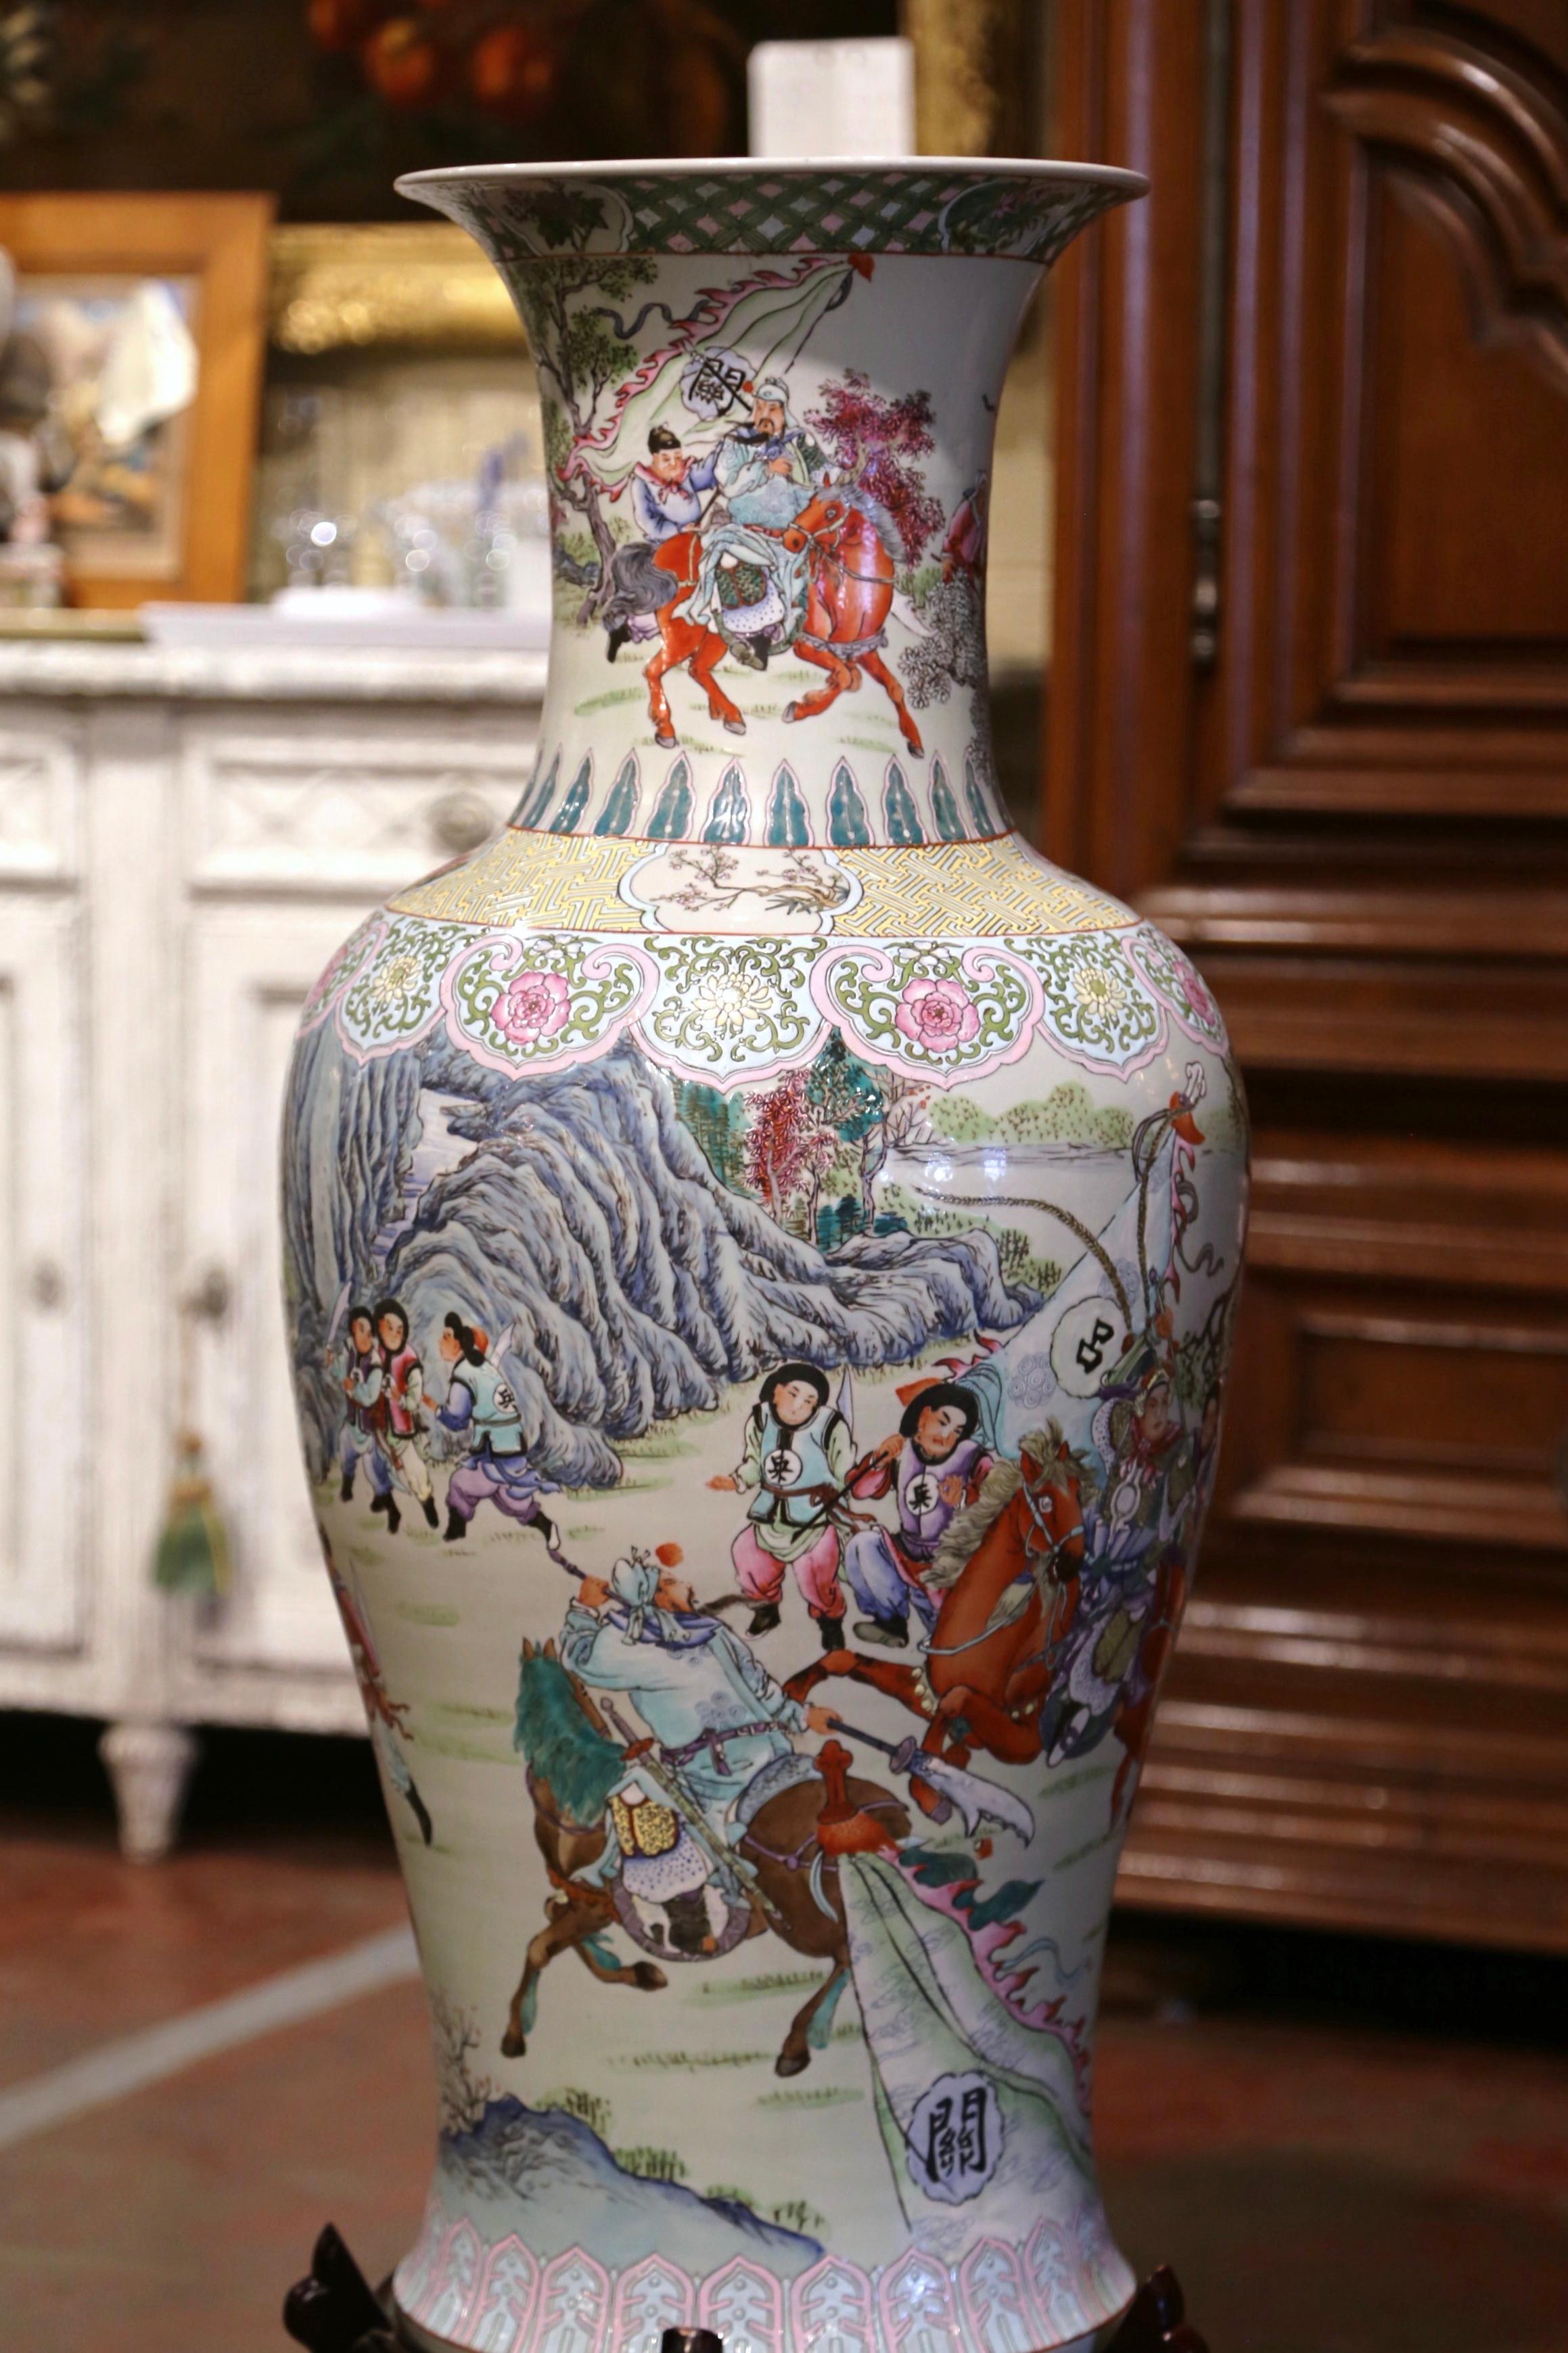 Crafted in China circa 1950, and standing on a carved wooden base, the tall porcelain vase is round in shape with an elegant long and wide neck. The colorful antique urn is decorated with hand painted figural motifs with people on horses. The large